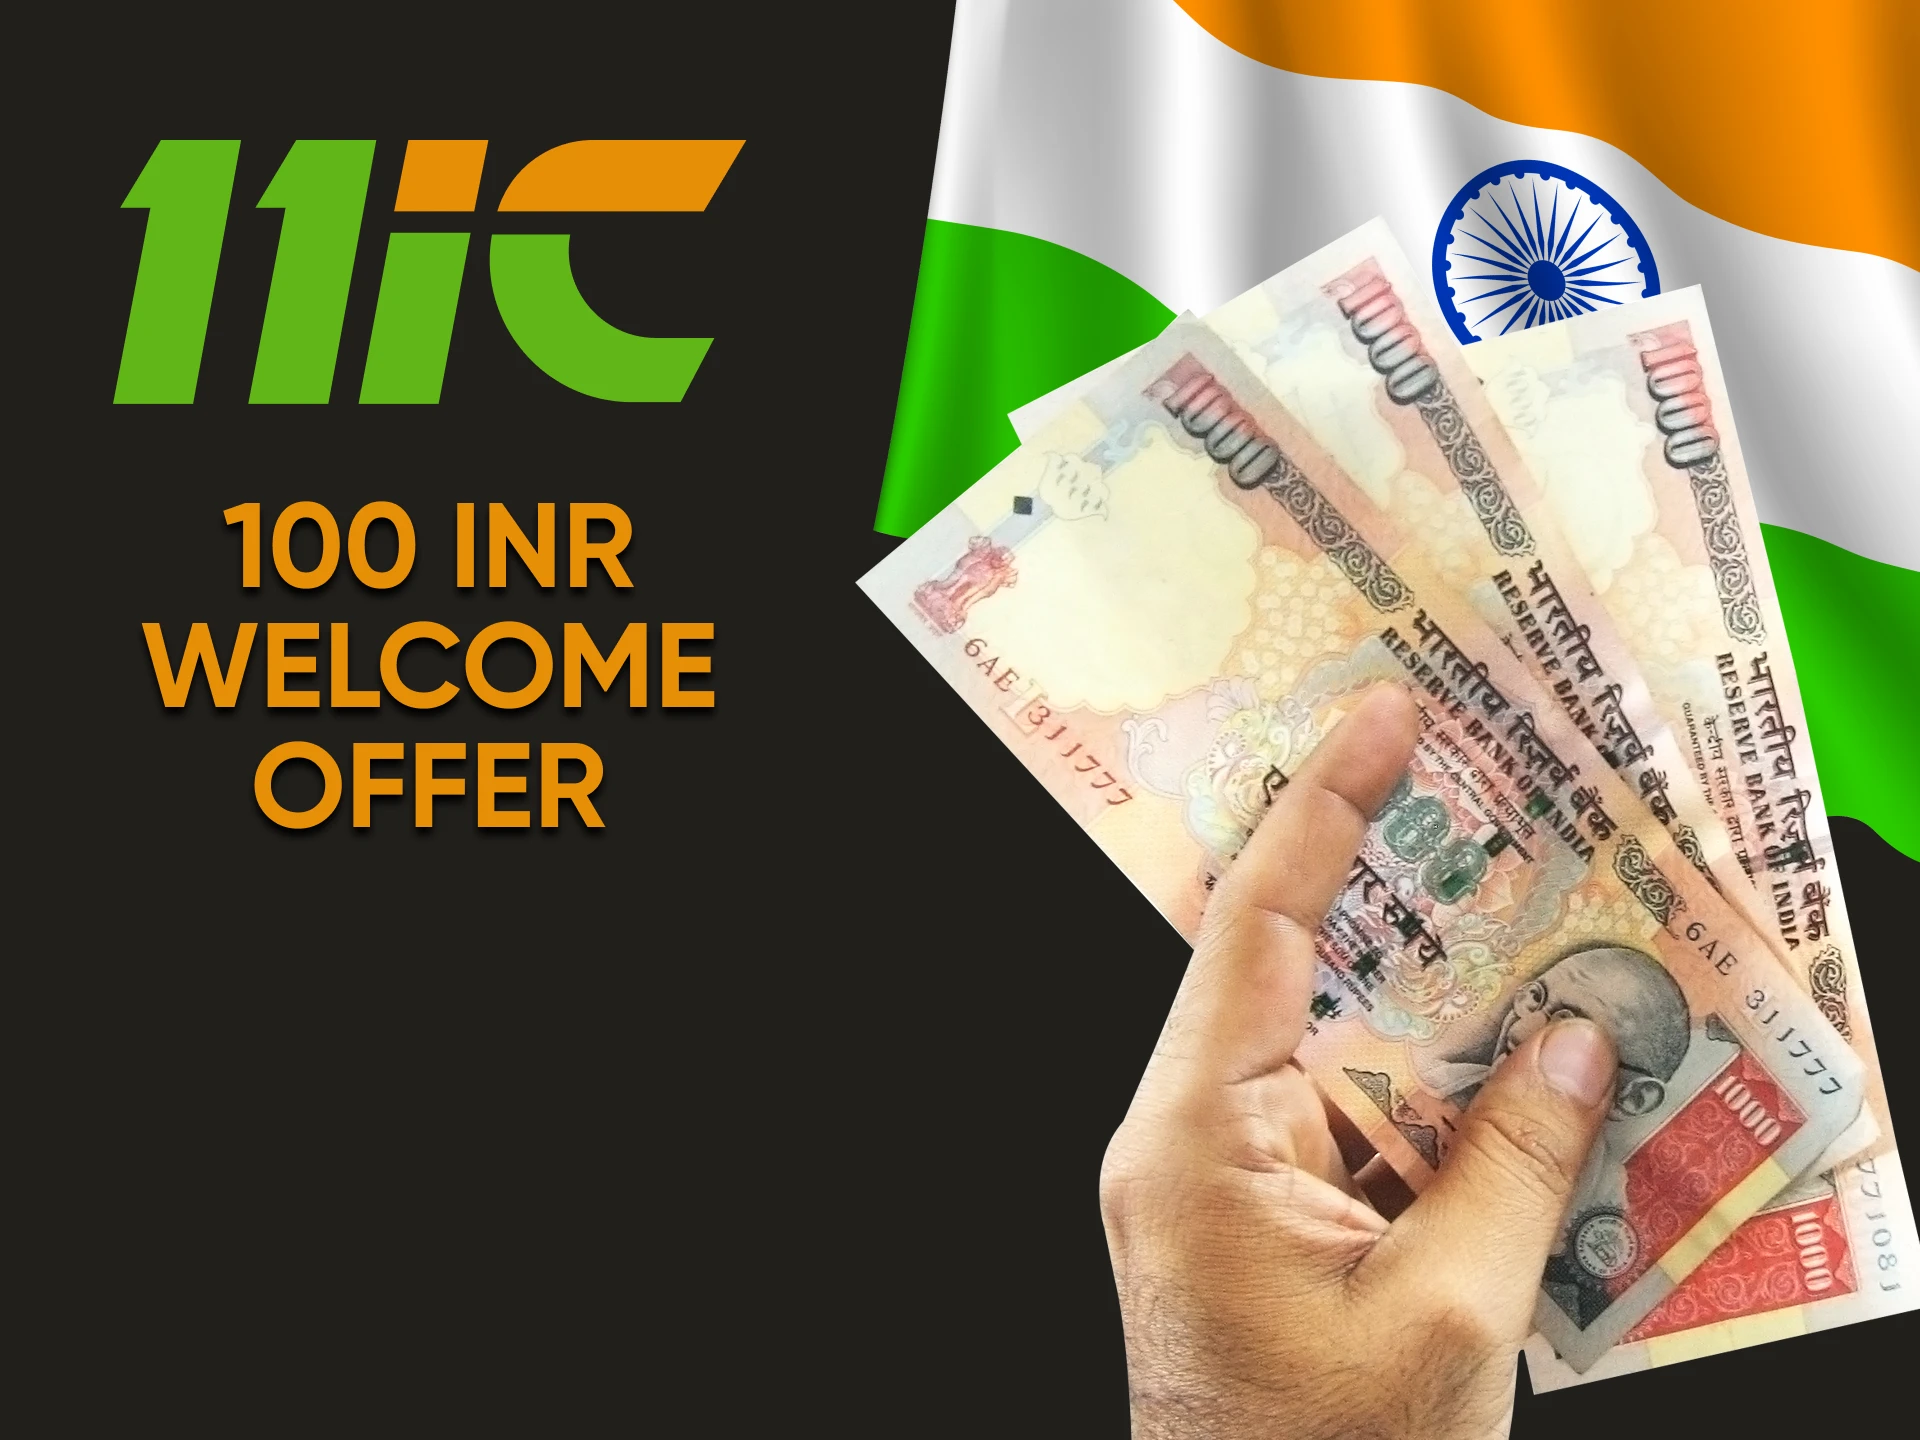 Claim your cricket betting welcome bonus offer from 11ic.